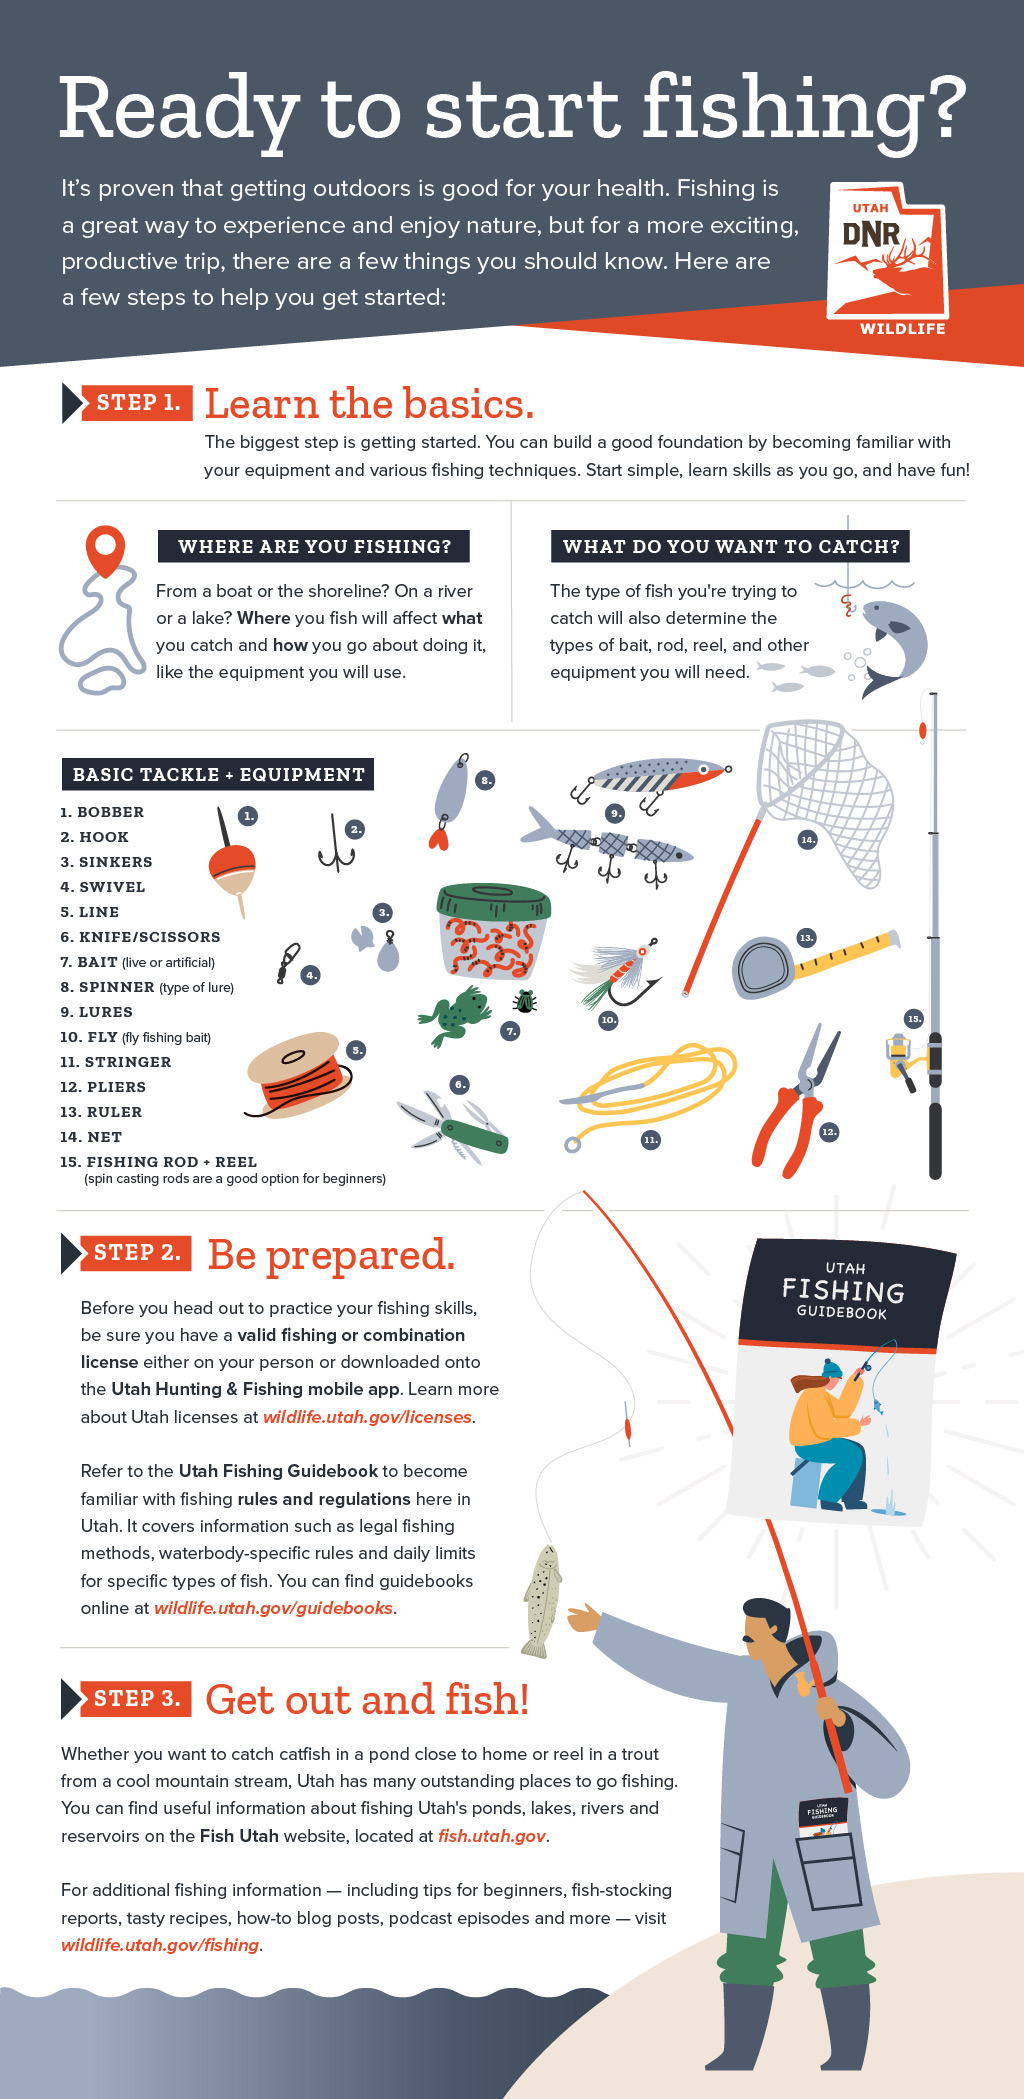 Ready to start fishing? Learn the basics, be prepared and get out and fish! Download our beginner fishing infographic for more information.